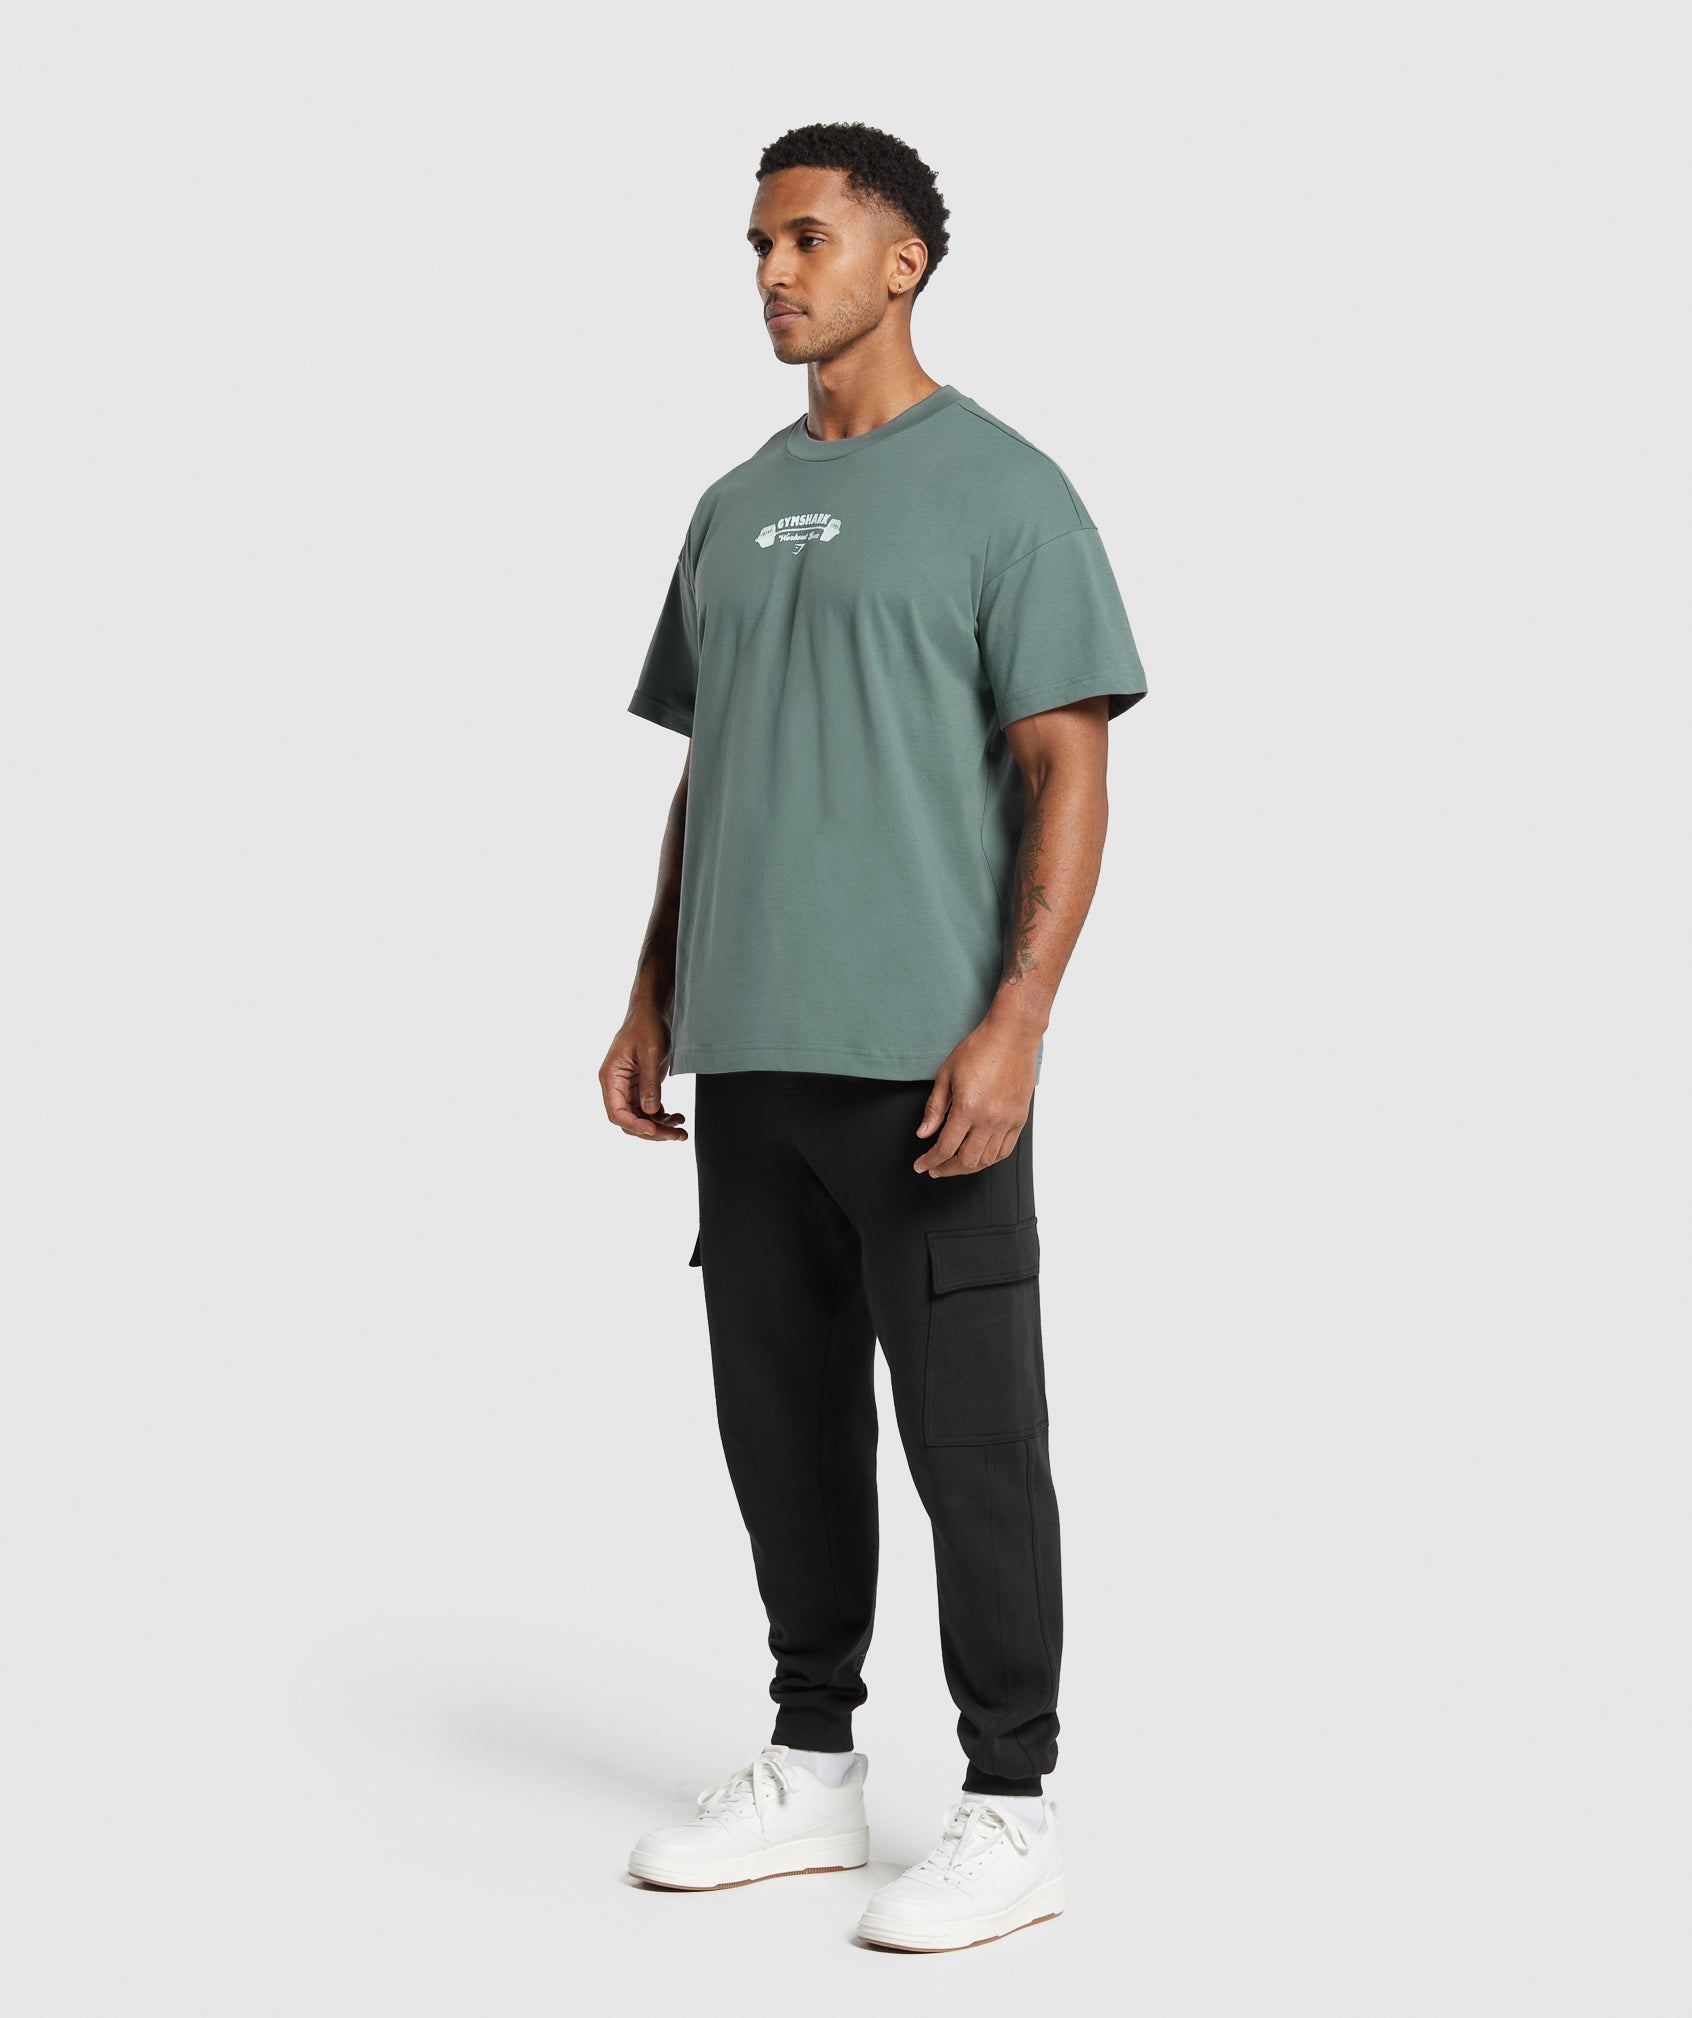 Workout Gear T-Shirt in Cargo Teal - view 4